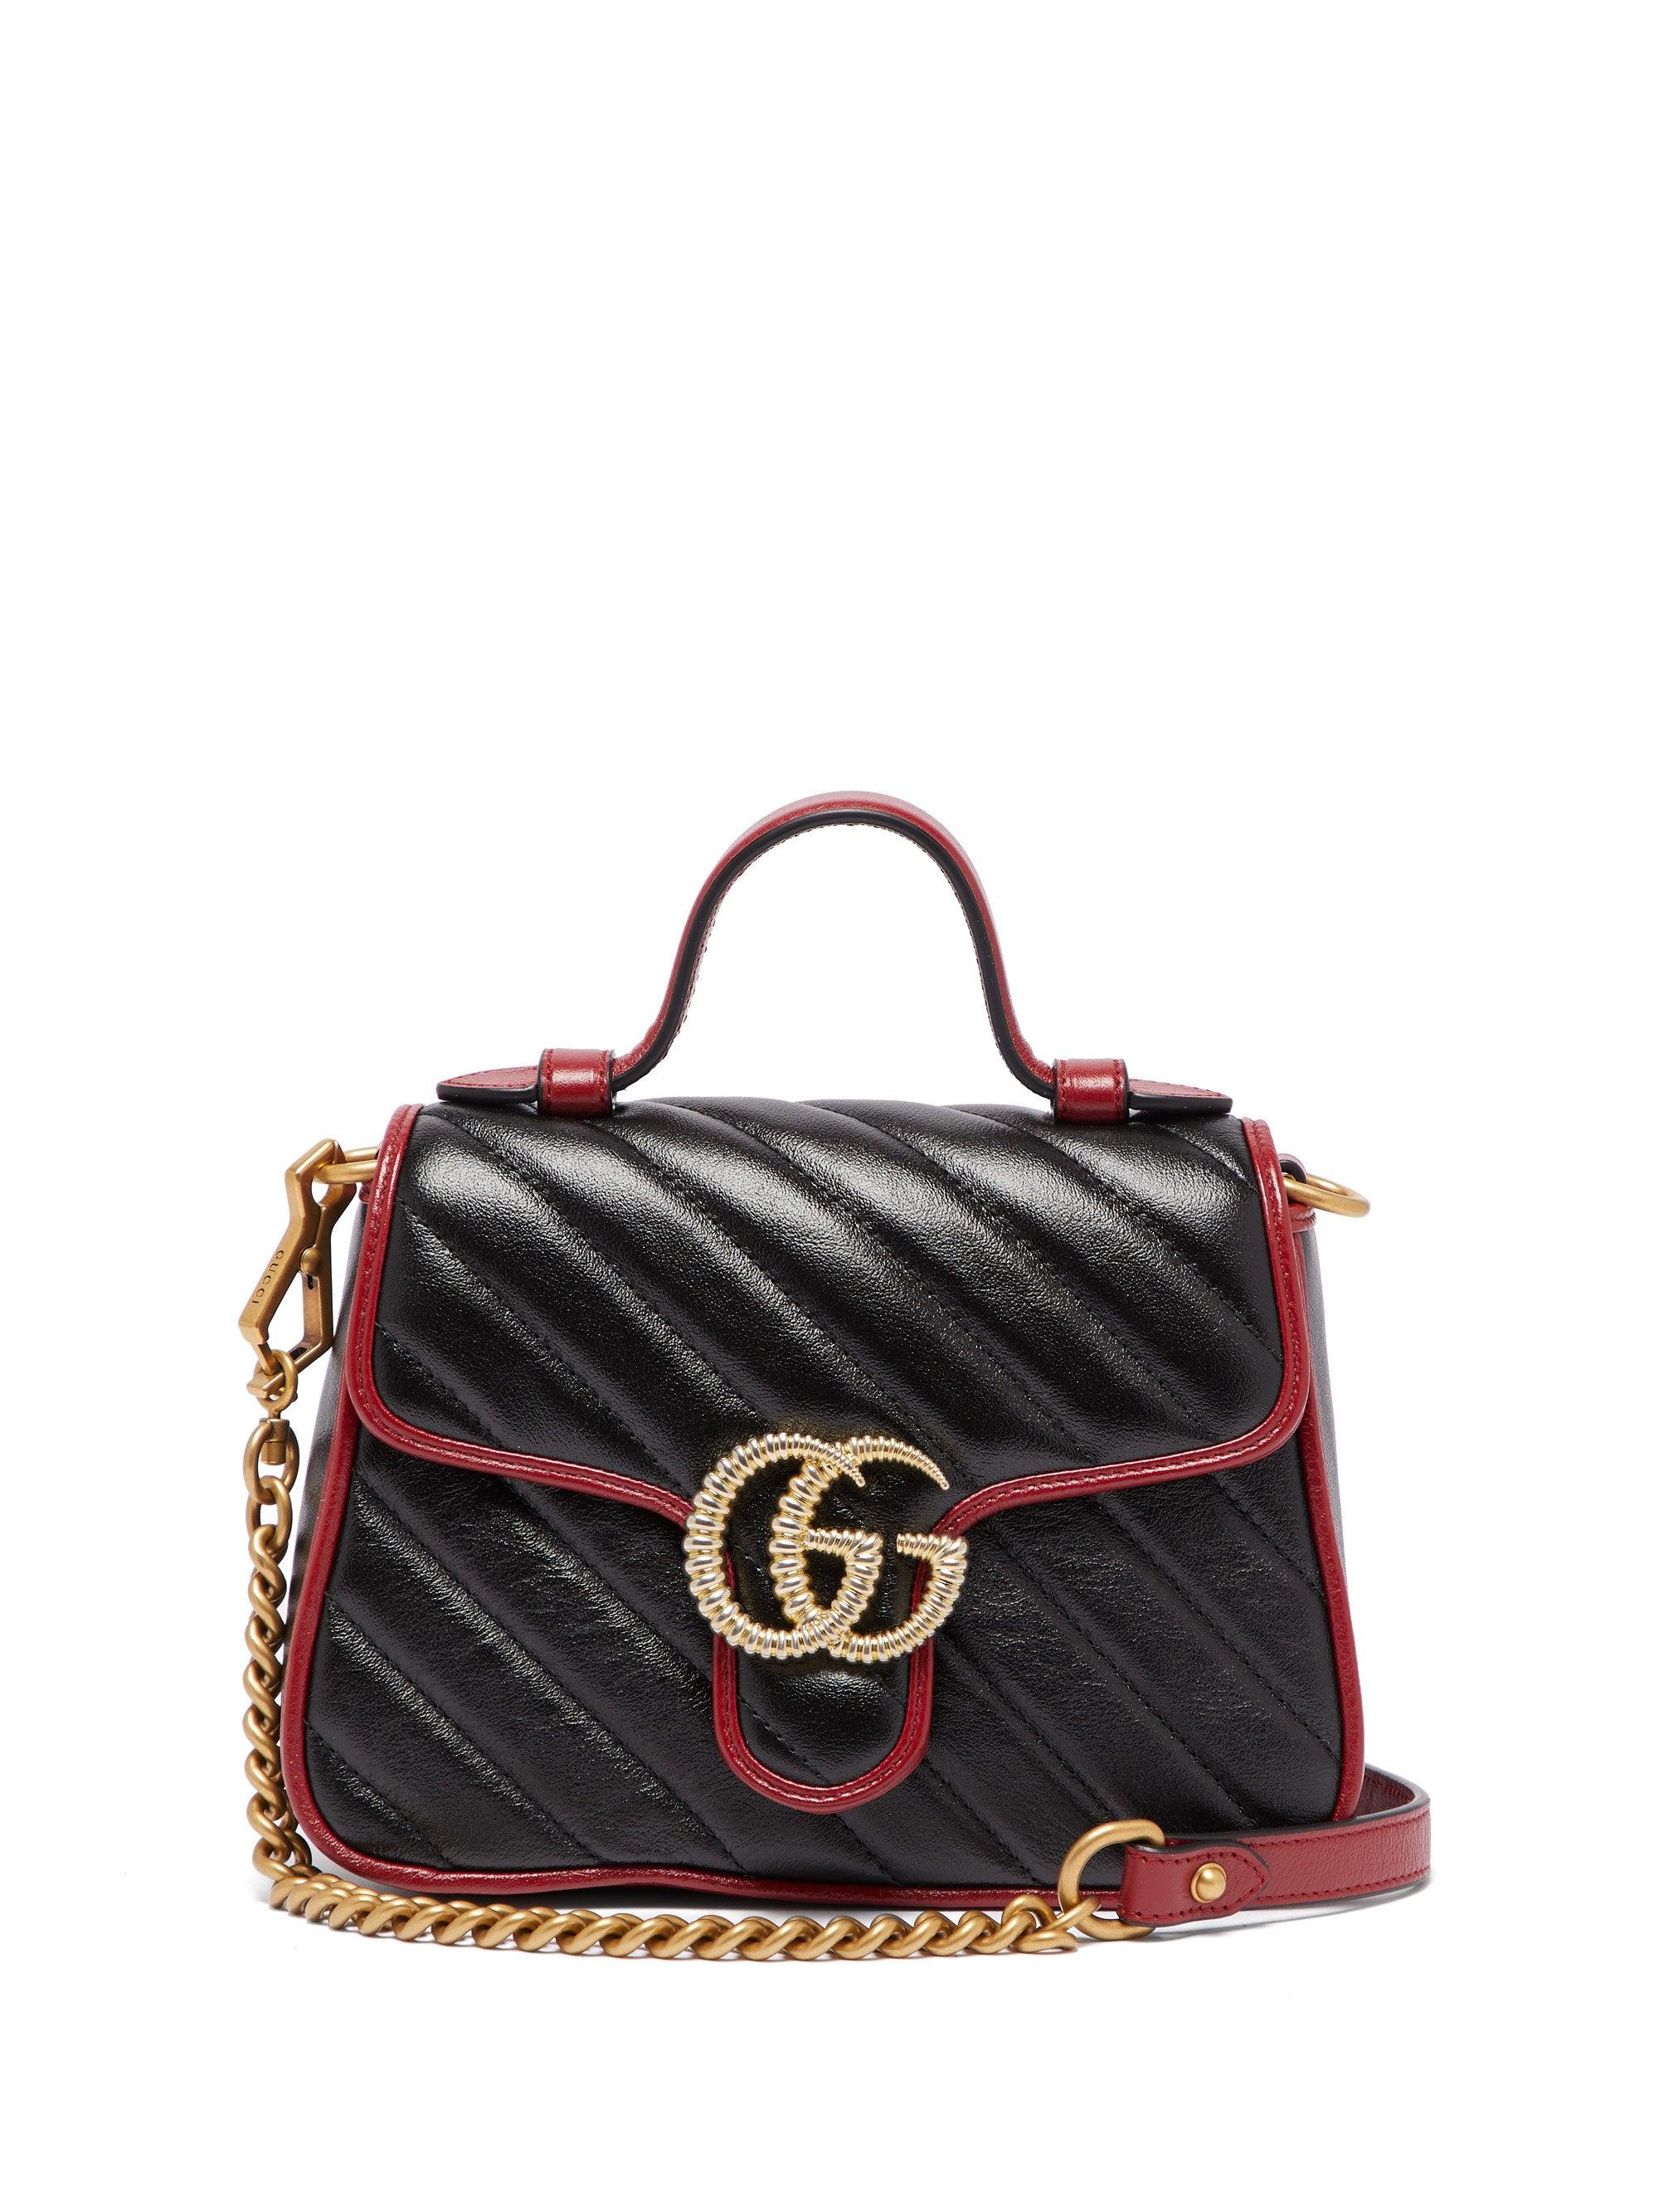 Gucci GG Marmont Mini Quilted-leather Cross-body Bag in Black - Lyst